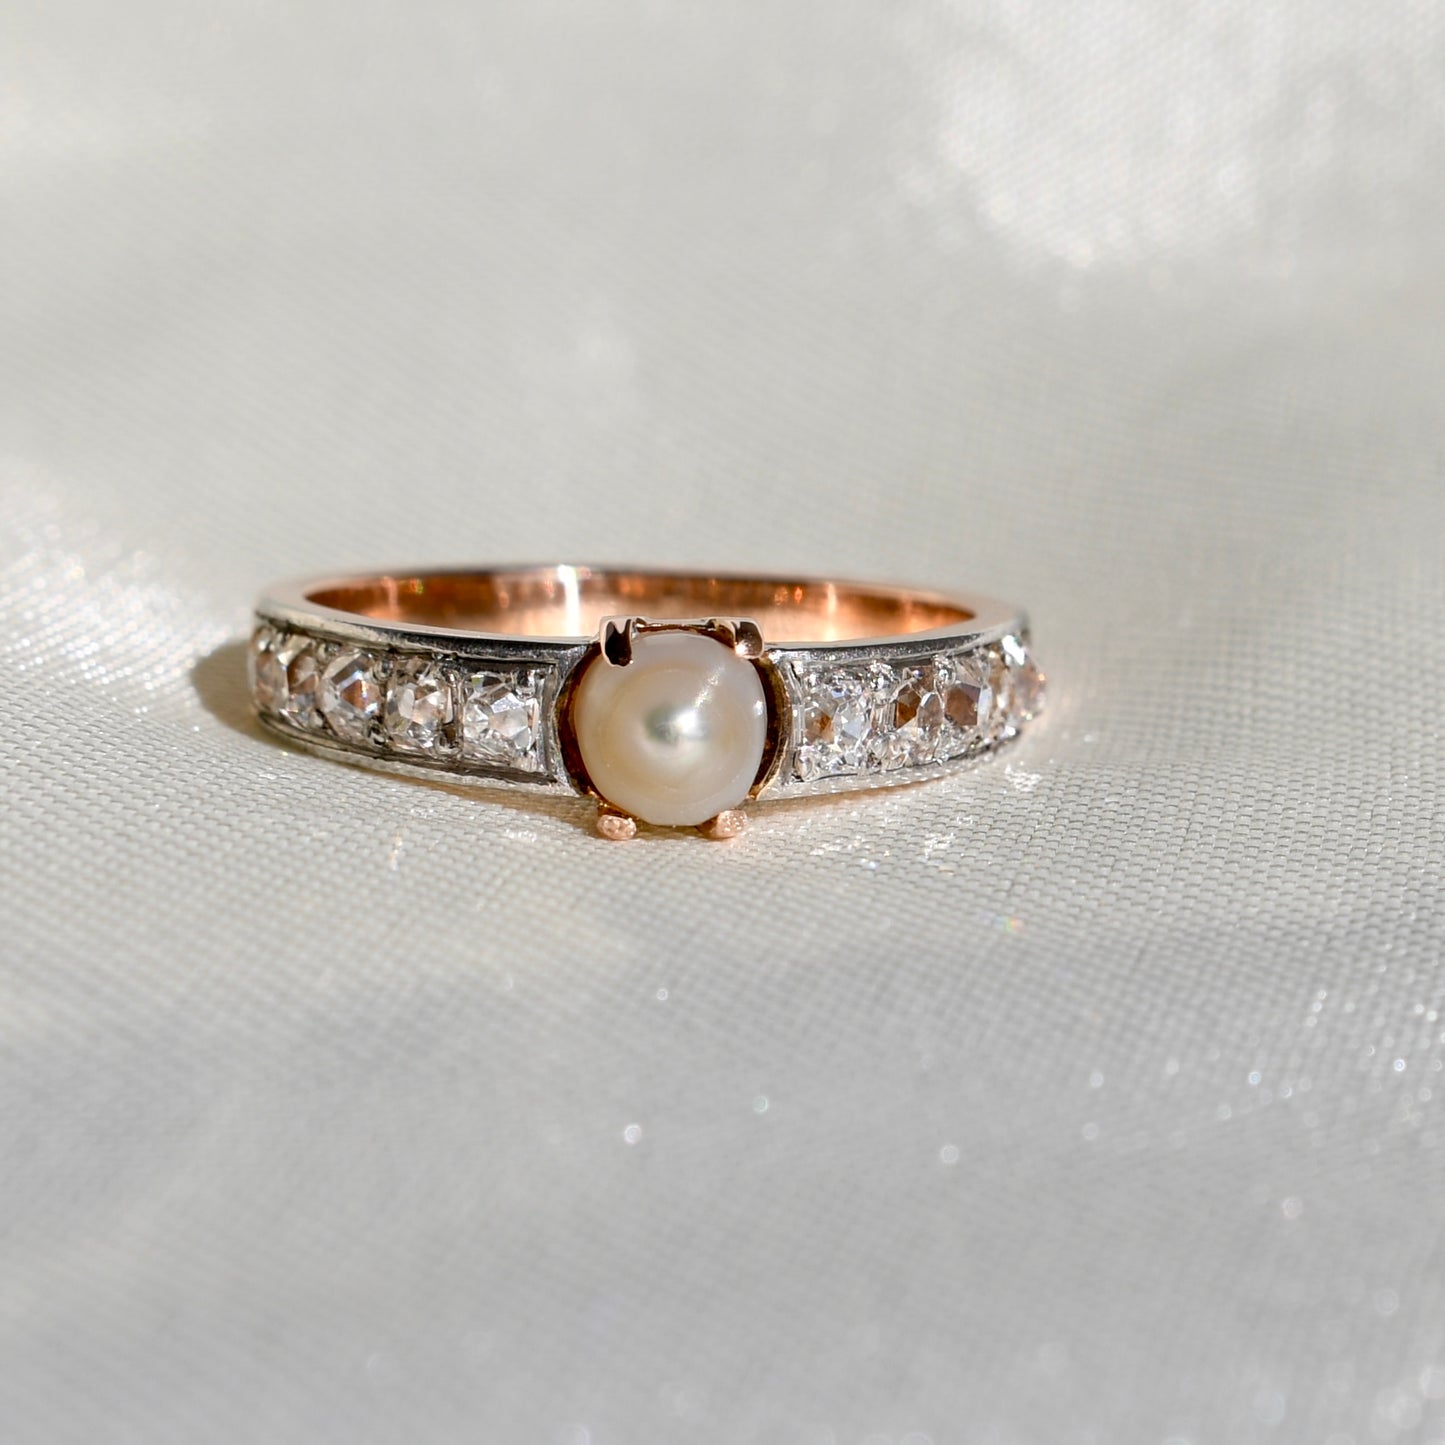 Antique pearl and old mine cut diamond band ring